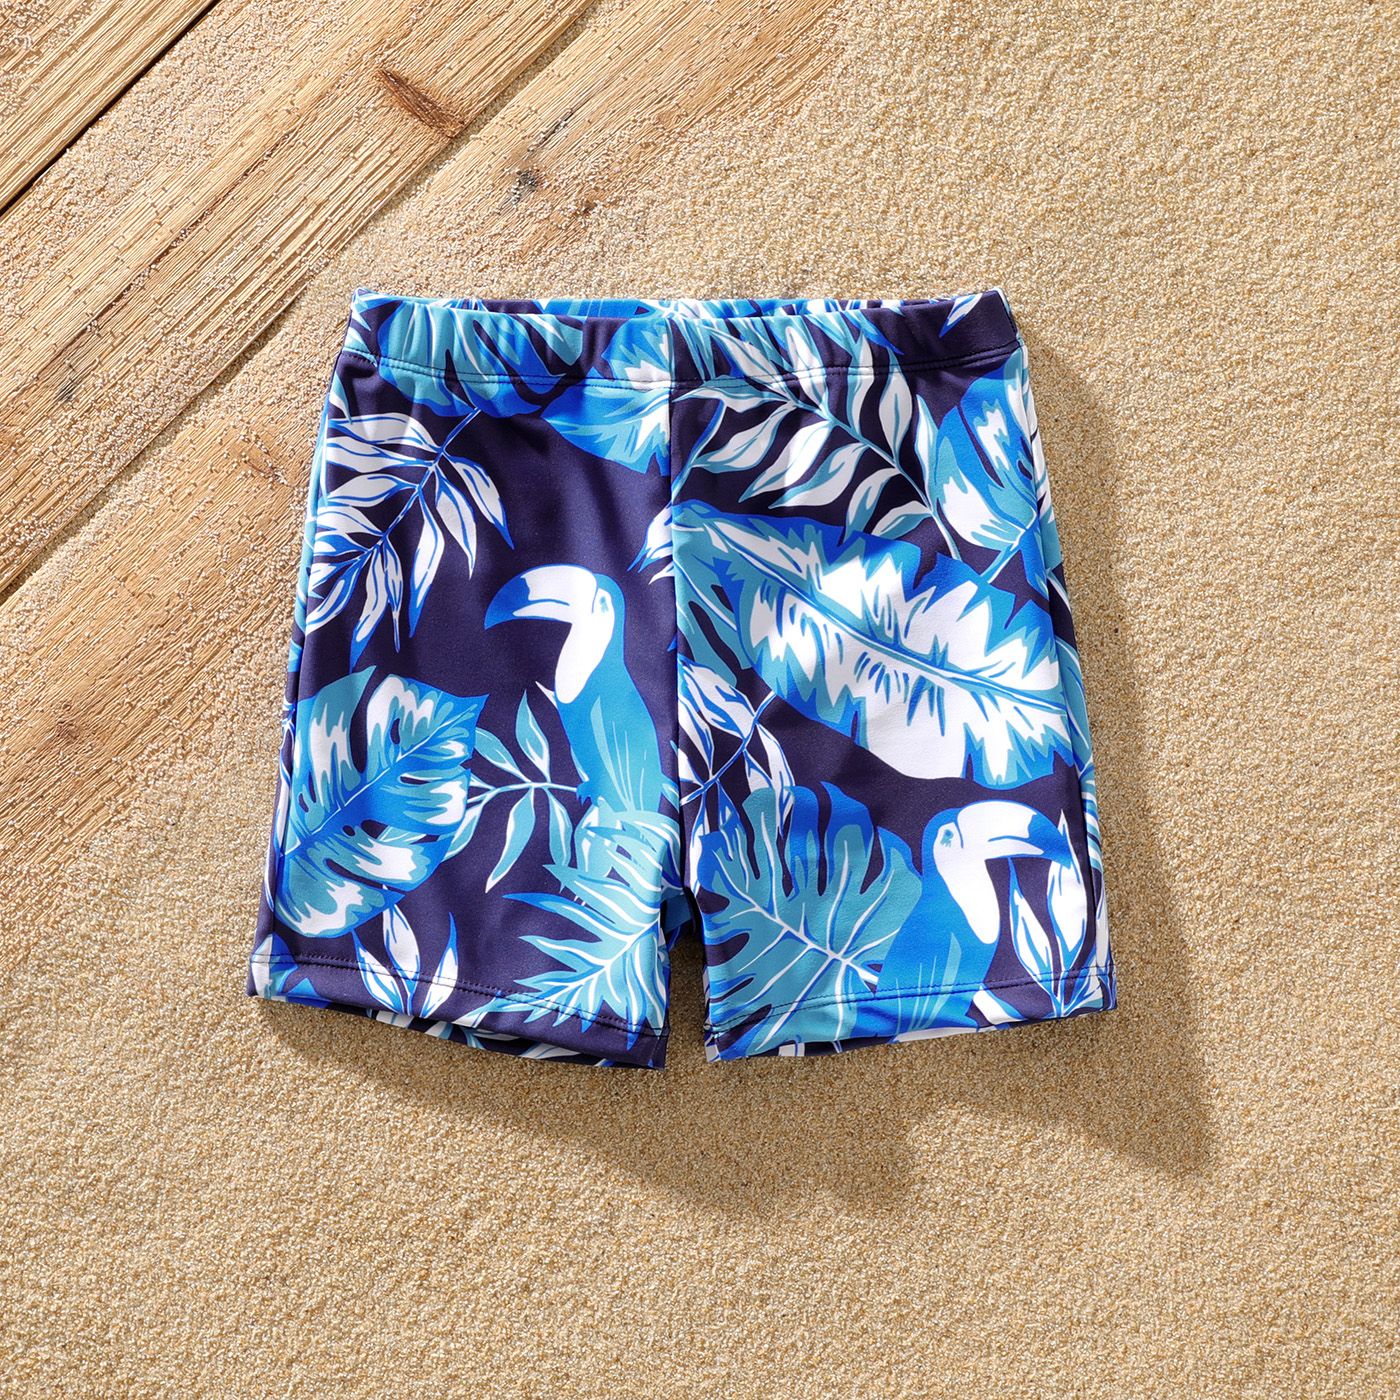 Family Matching Palm Leaves Print Blue One-piece Swimsuit